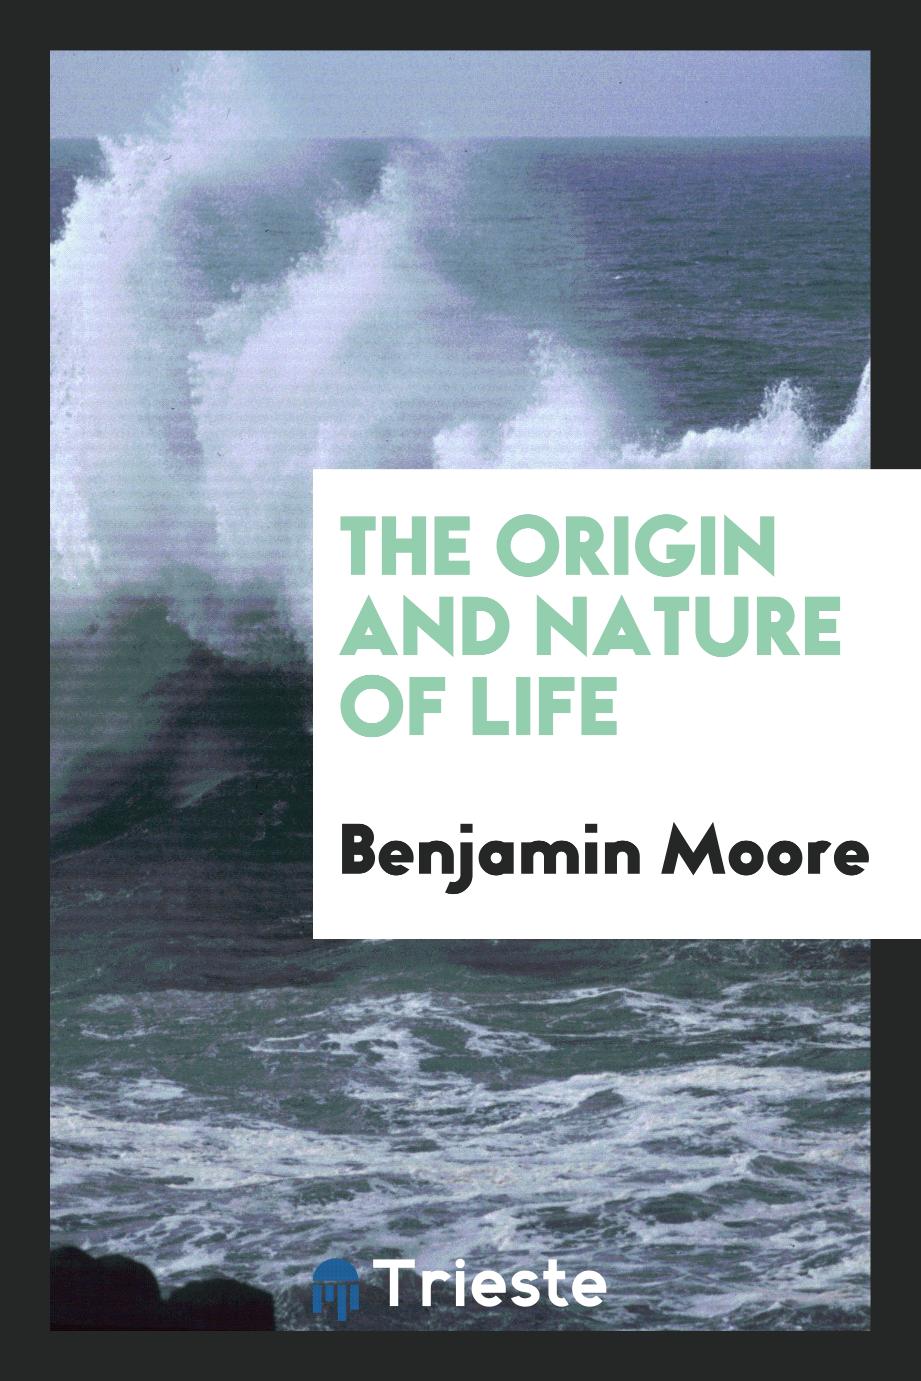 The origin and nature of life